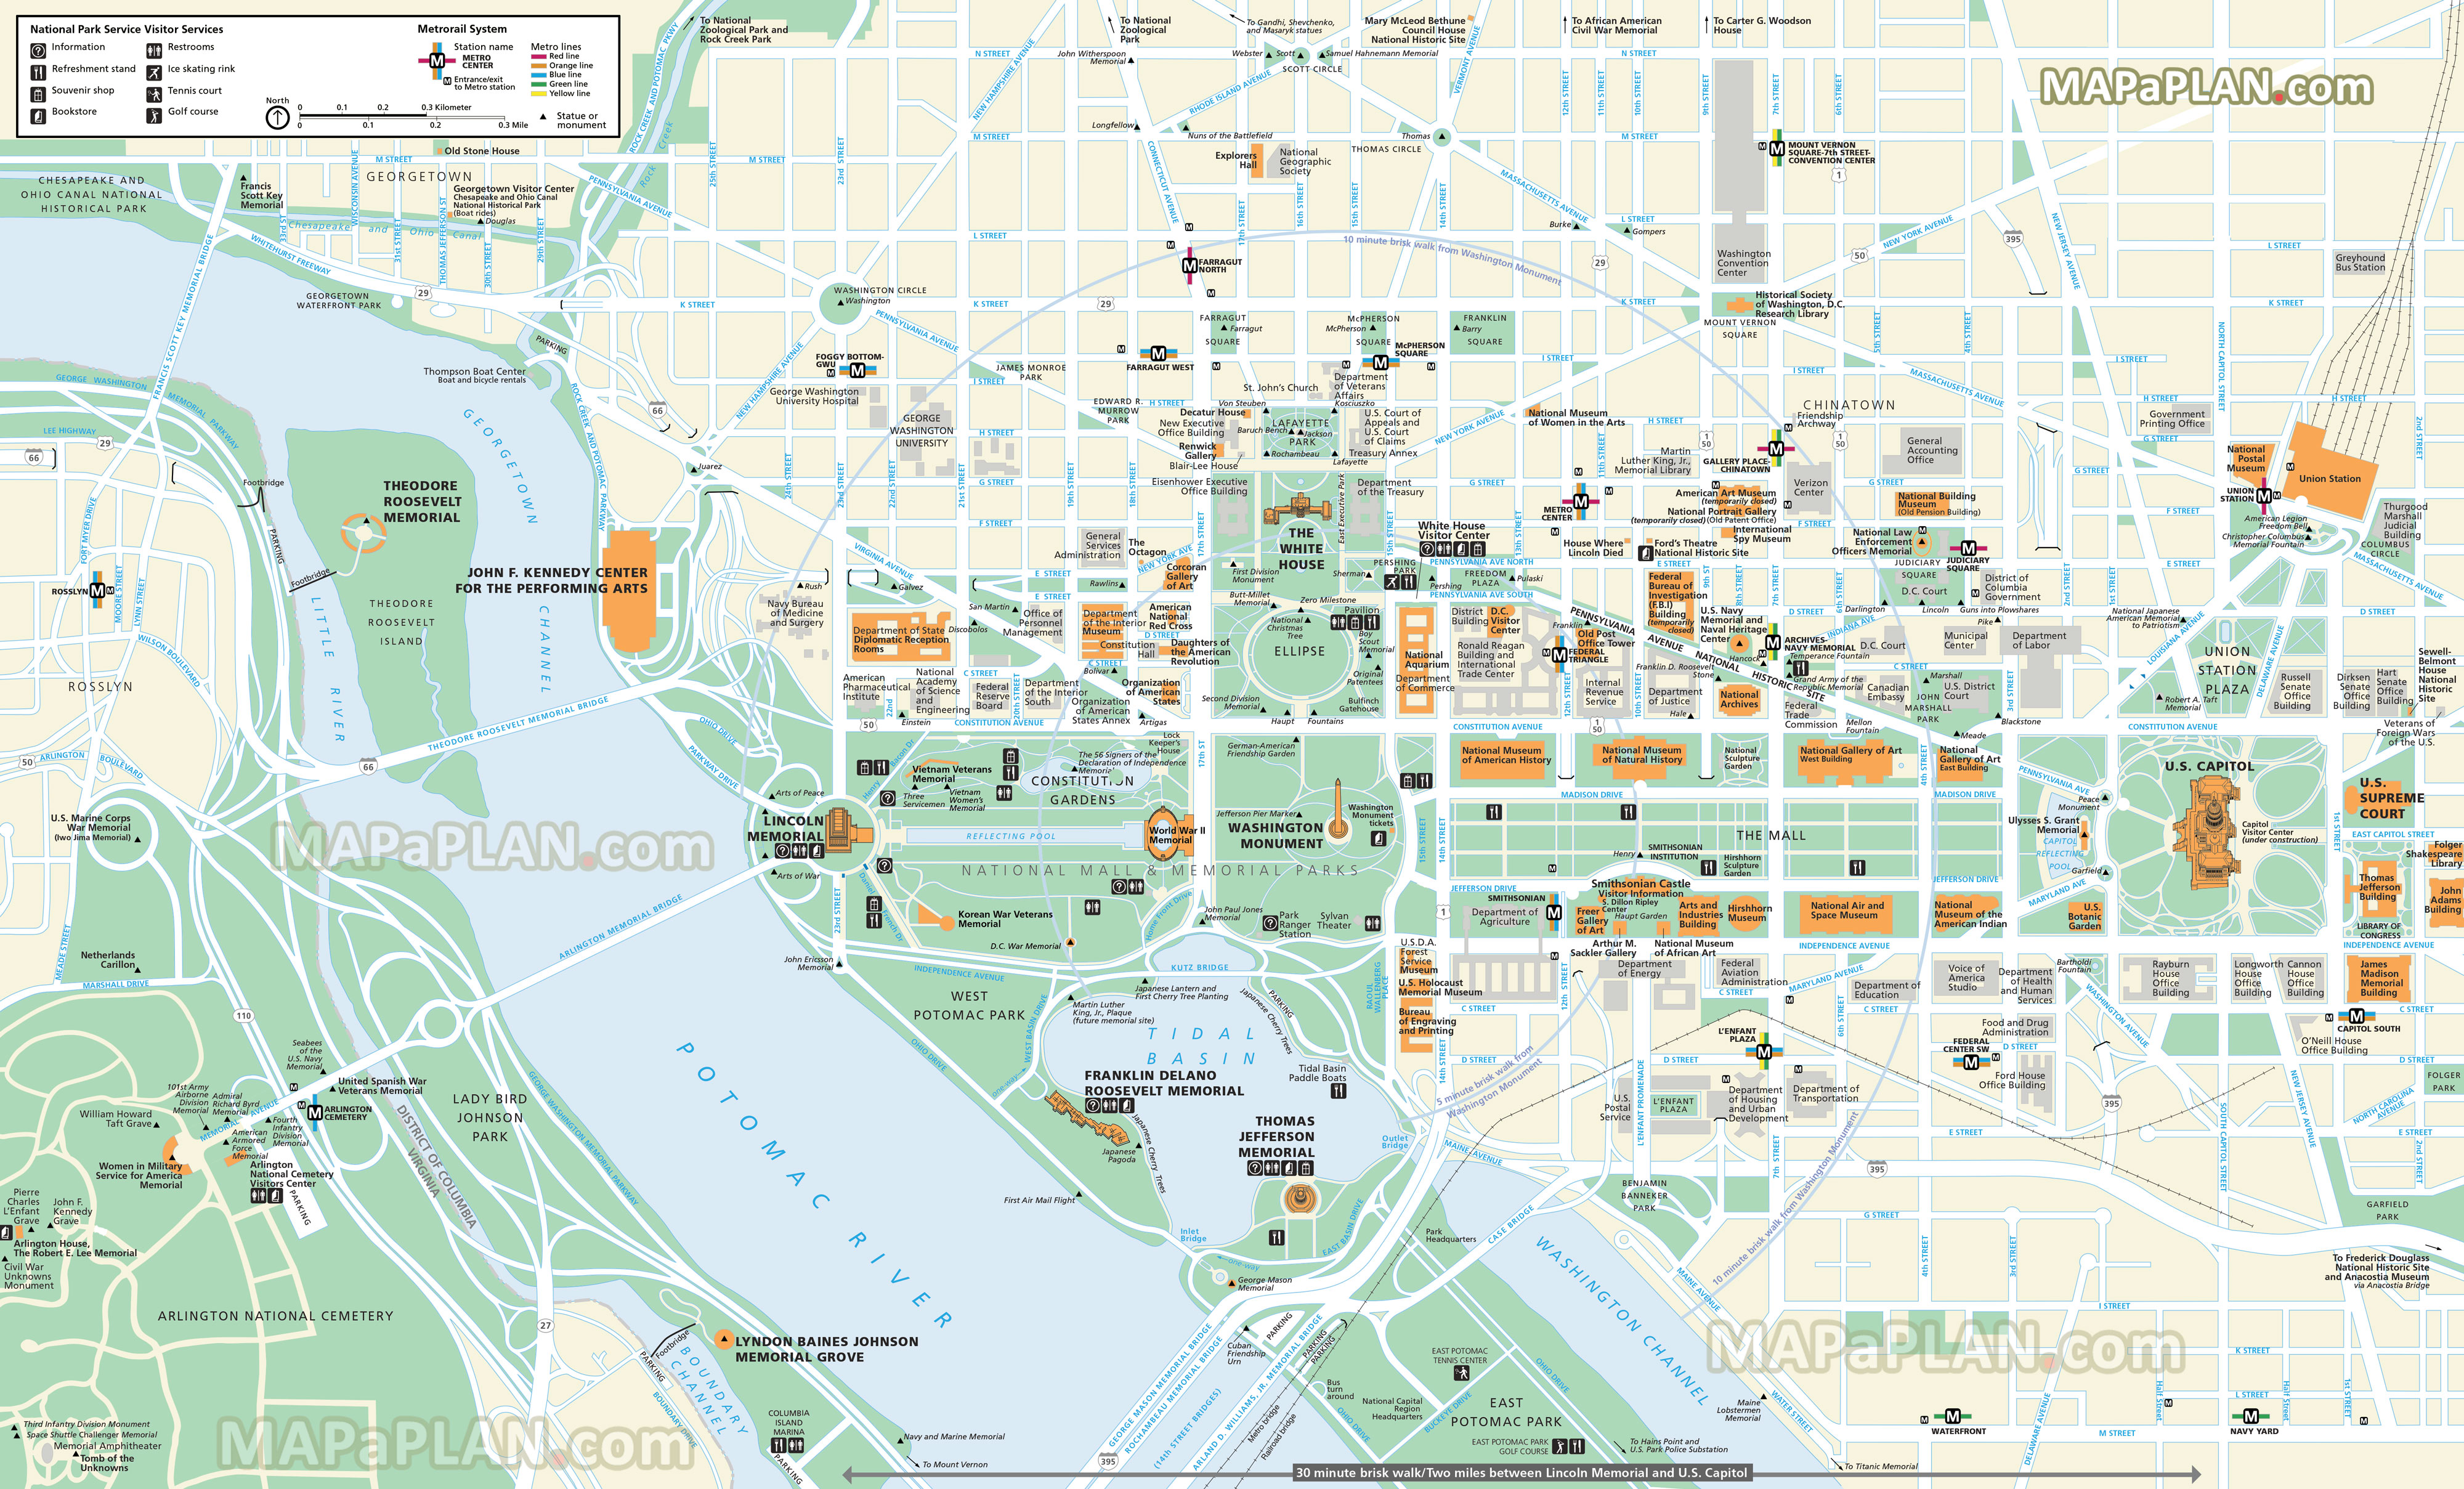 free street names map the mall environs main landmarks most popular sights great art spots Washington DC top tourist attractions map